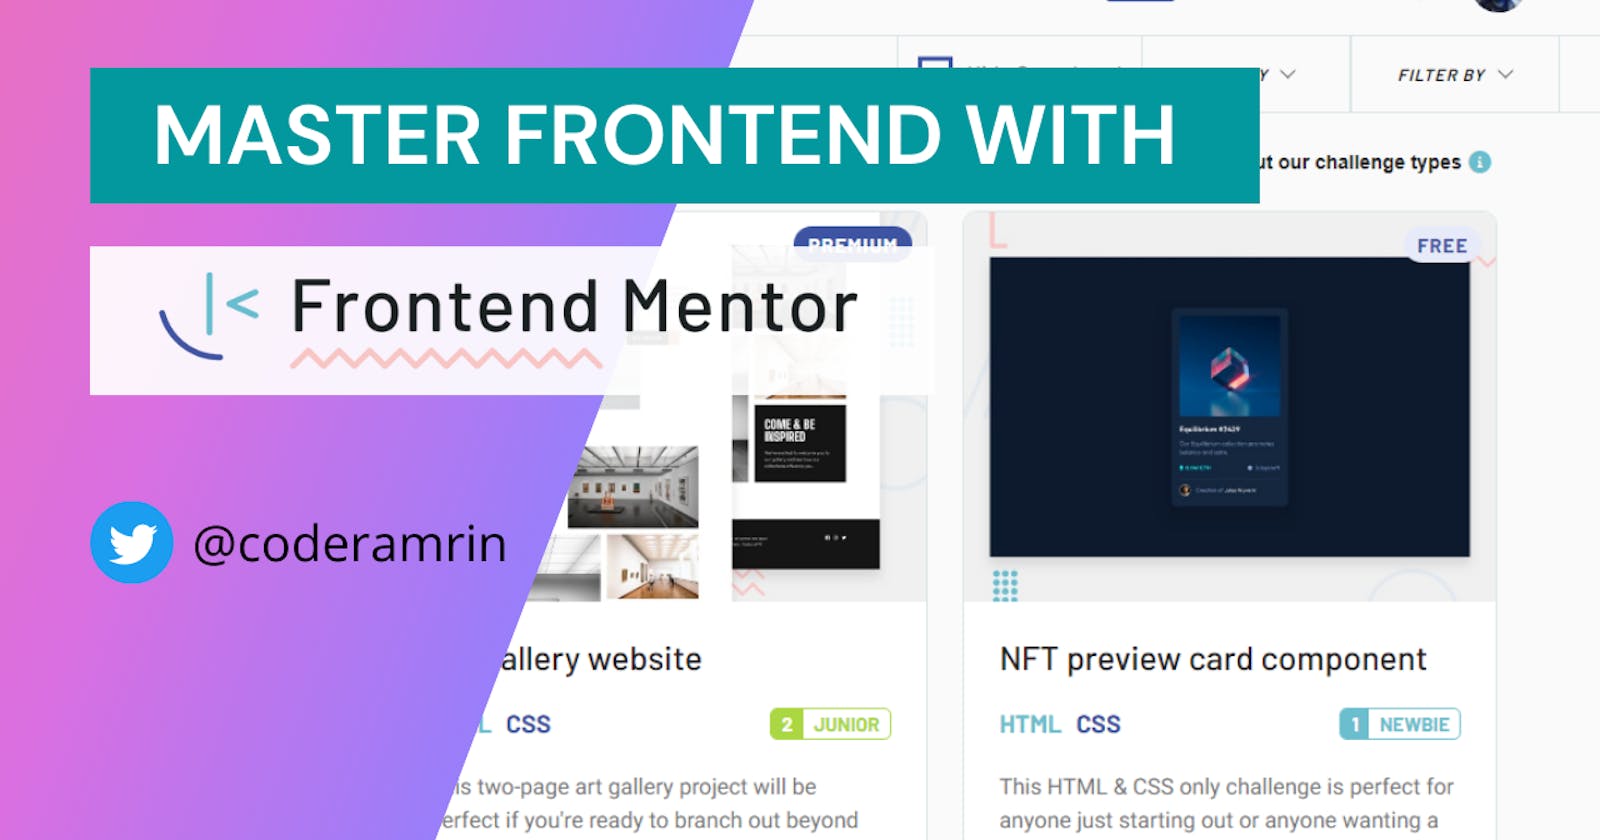 Master Frontend by doing Frontendmentor challenges